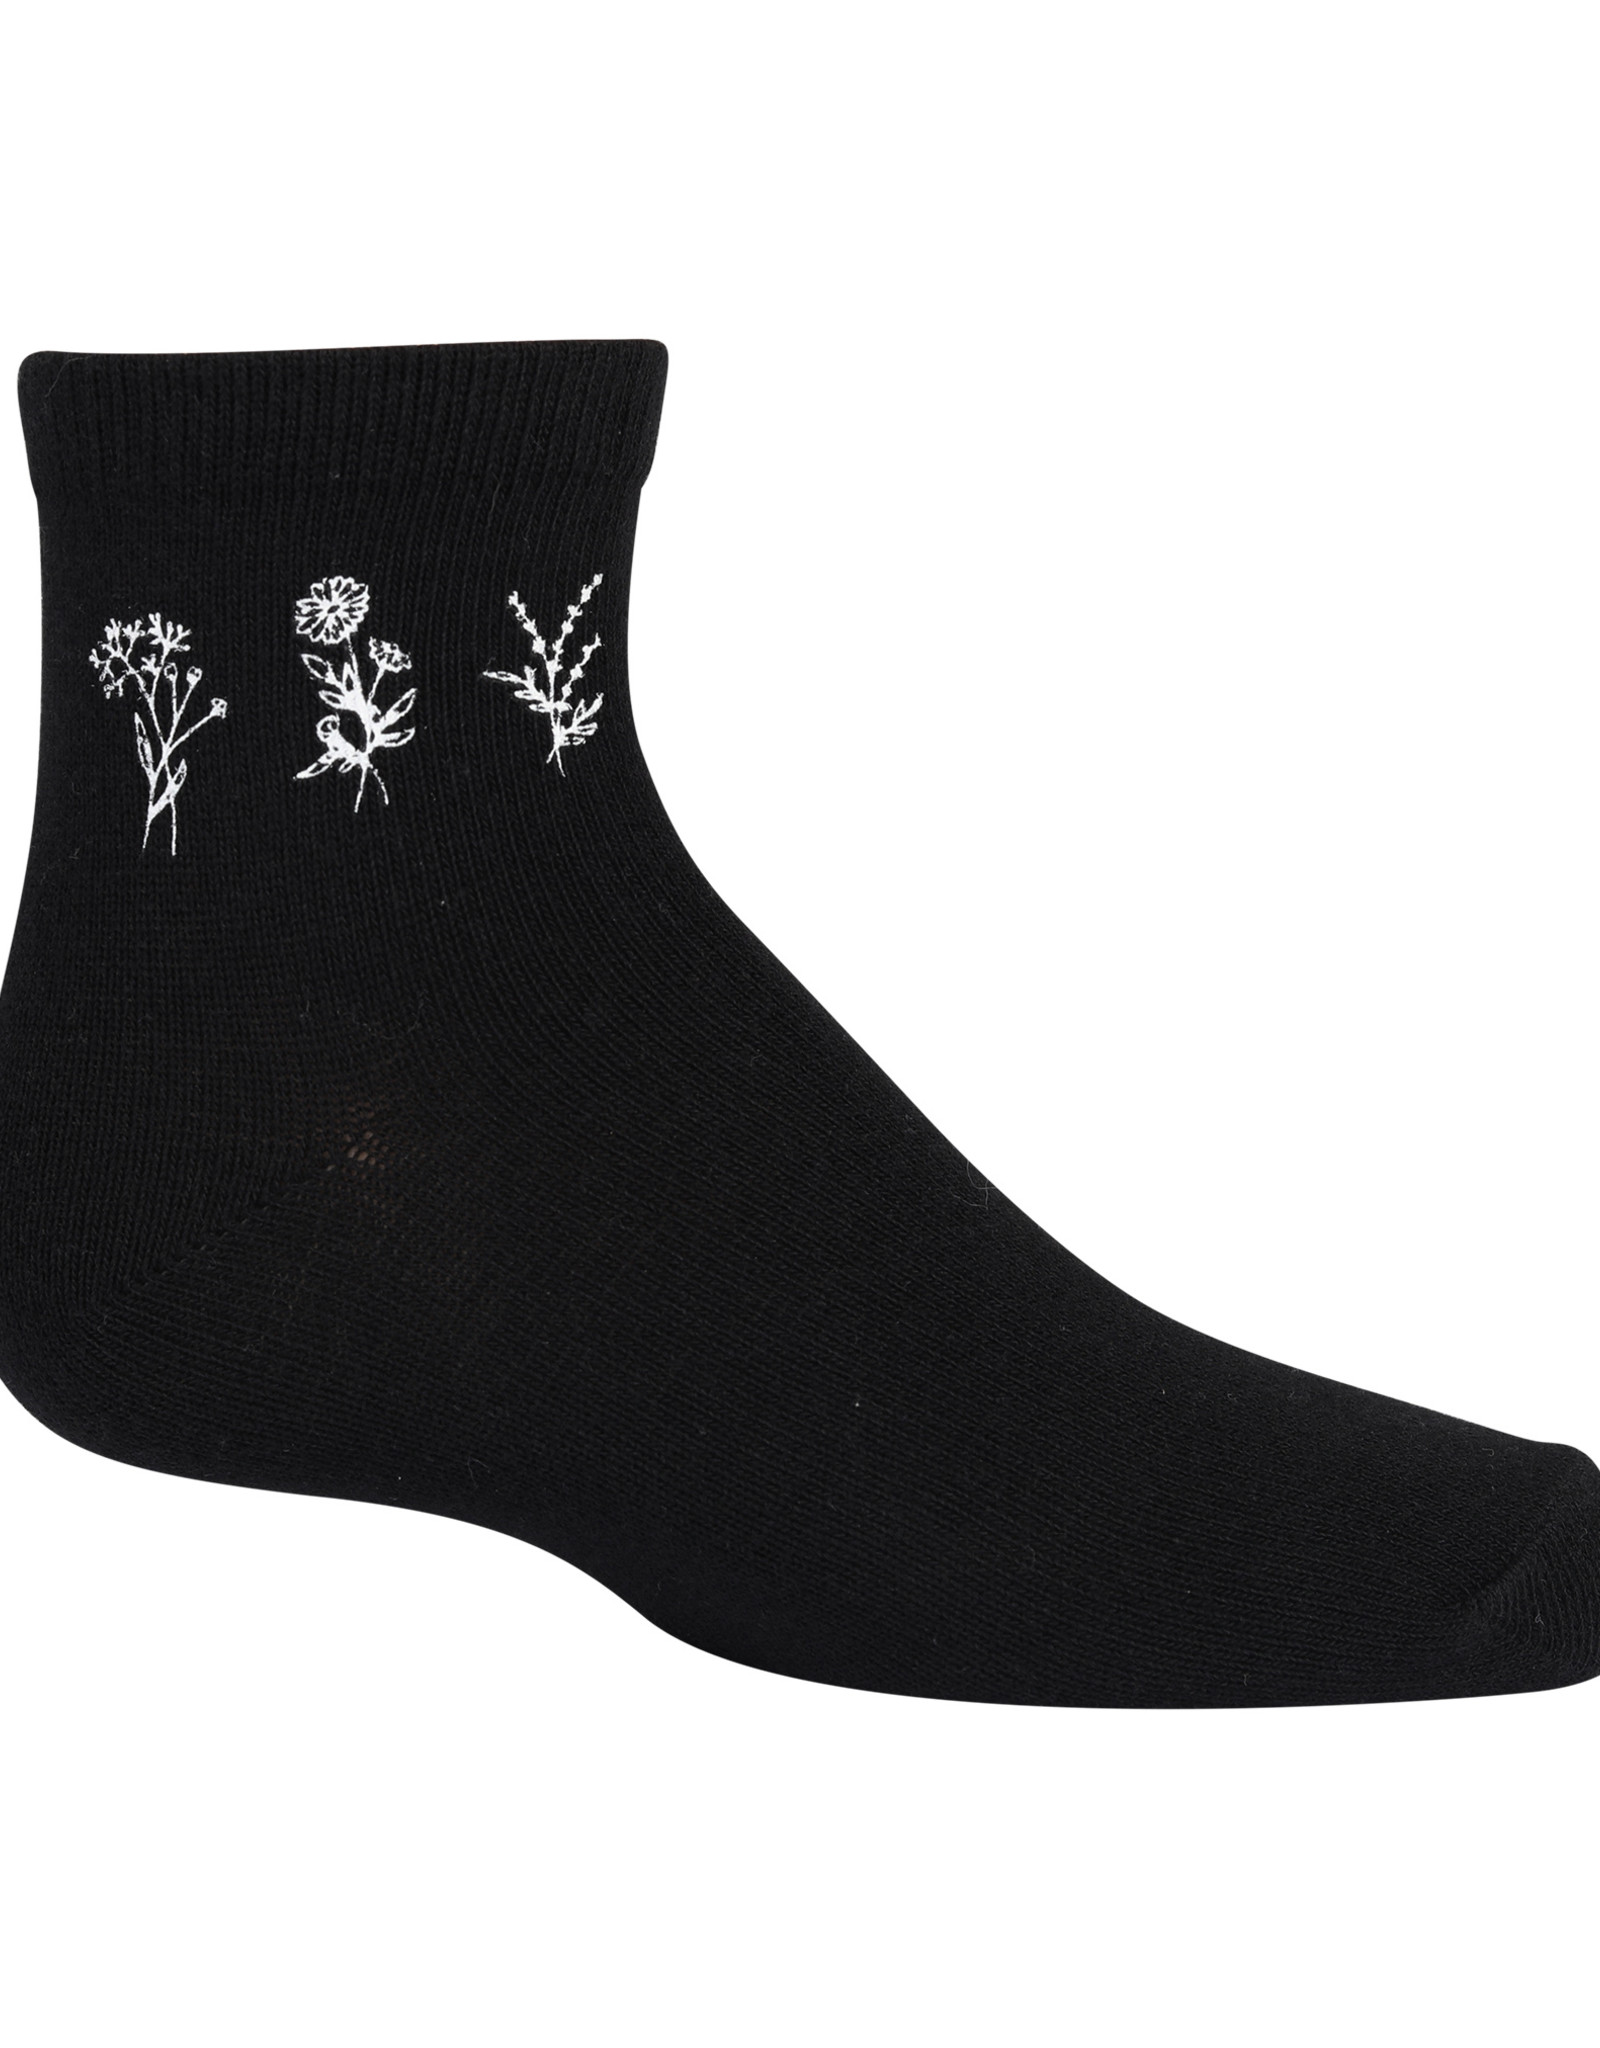 Zubii Zubii Floral Band Ankle Sock